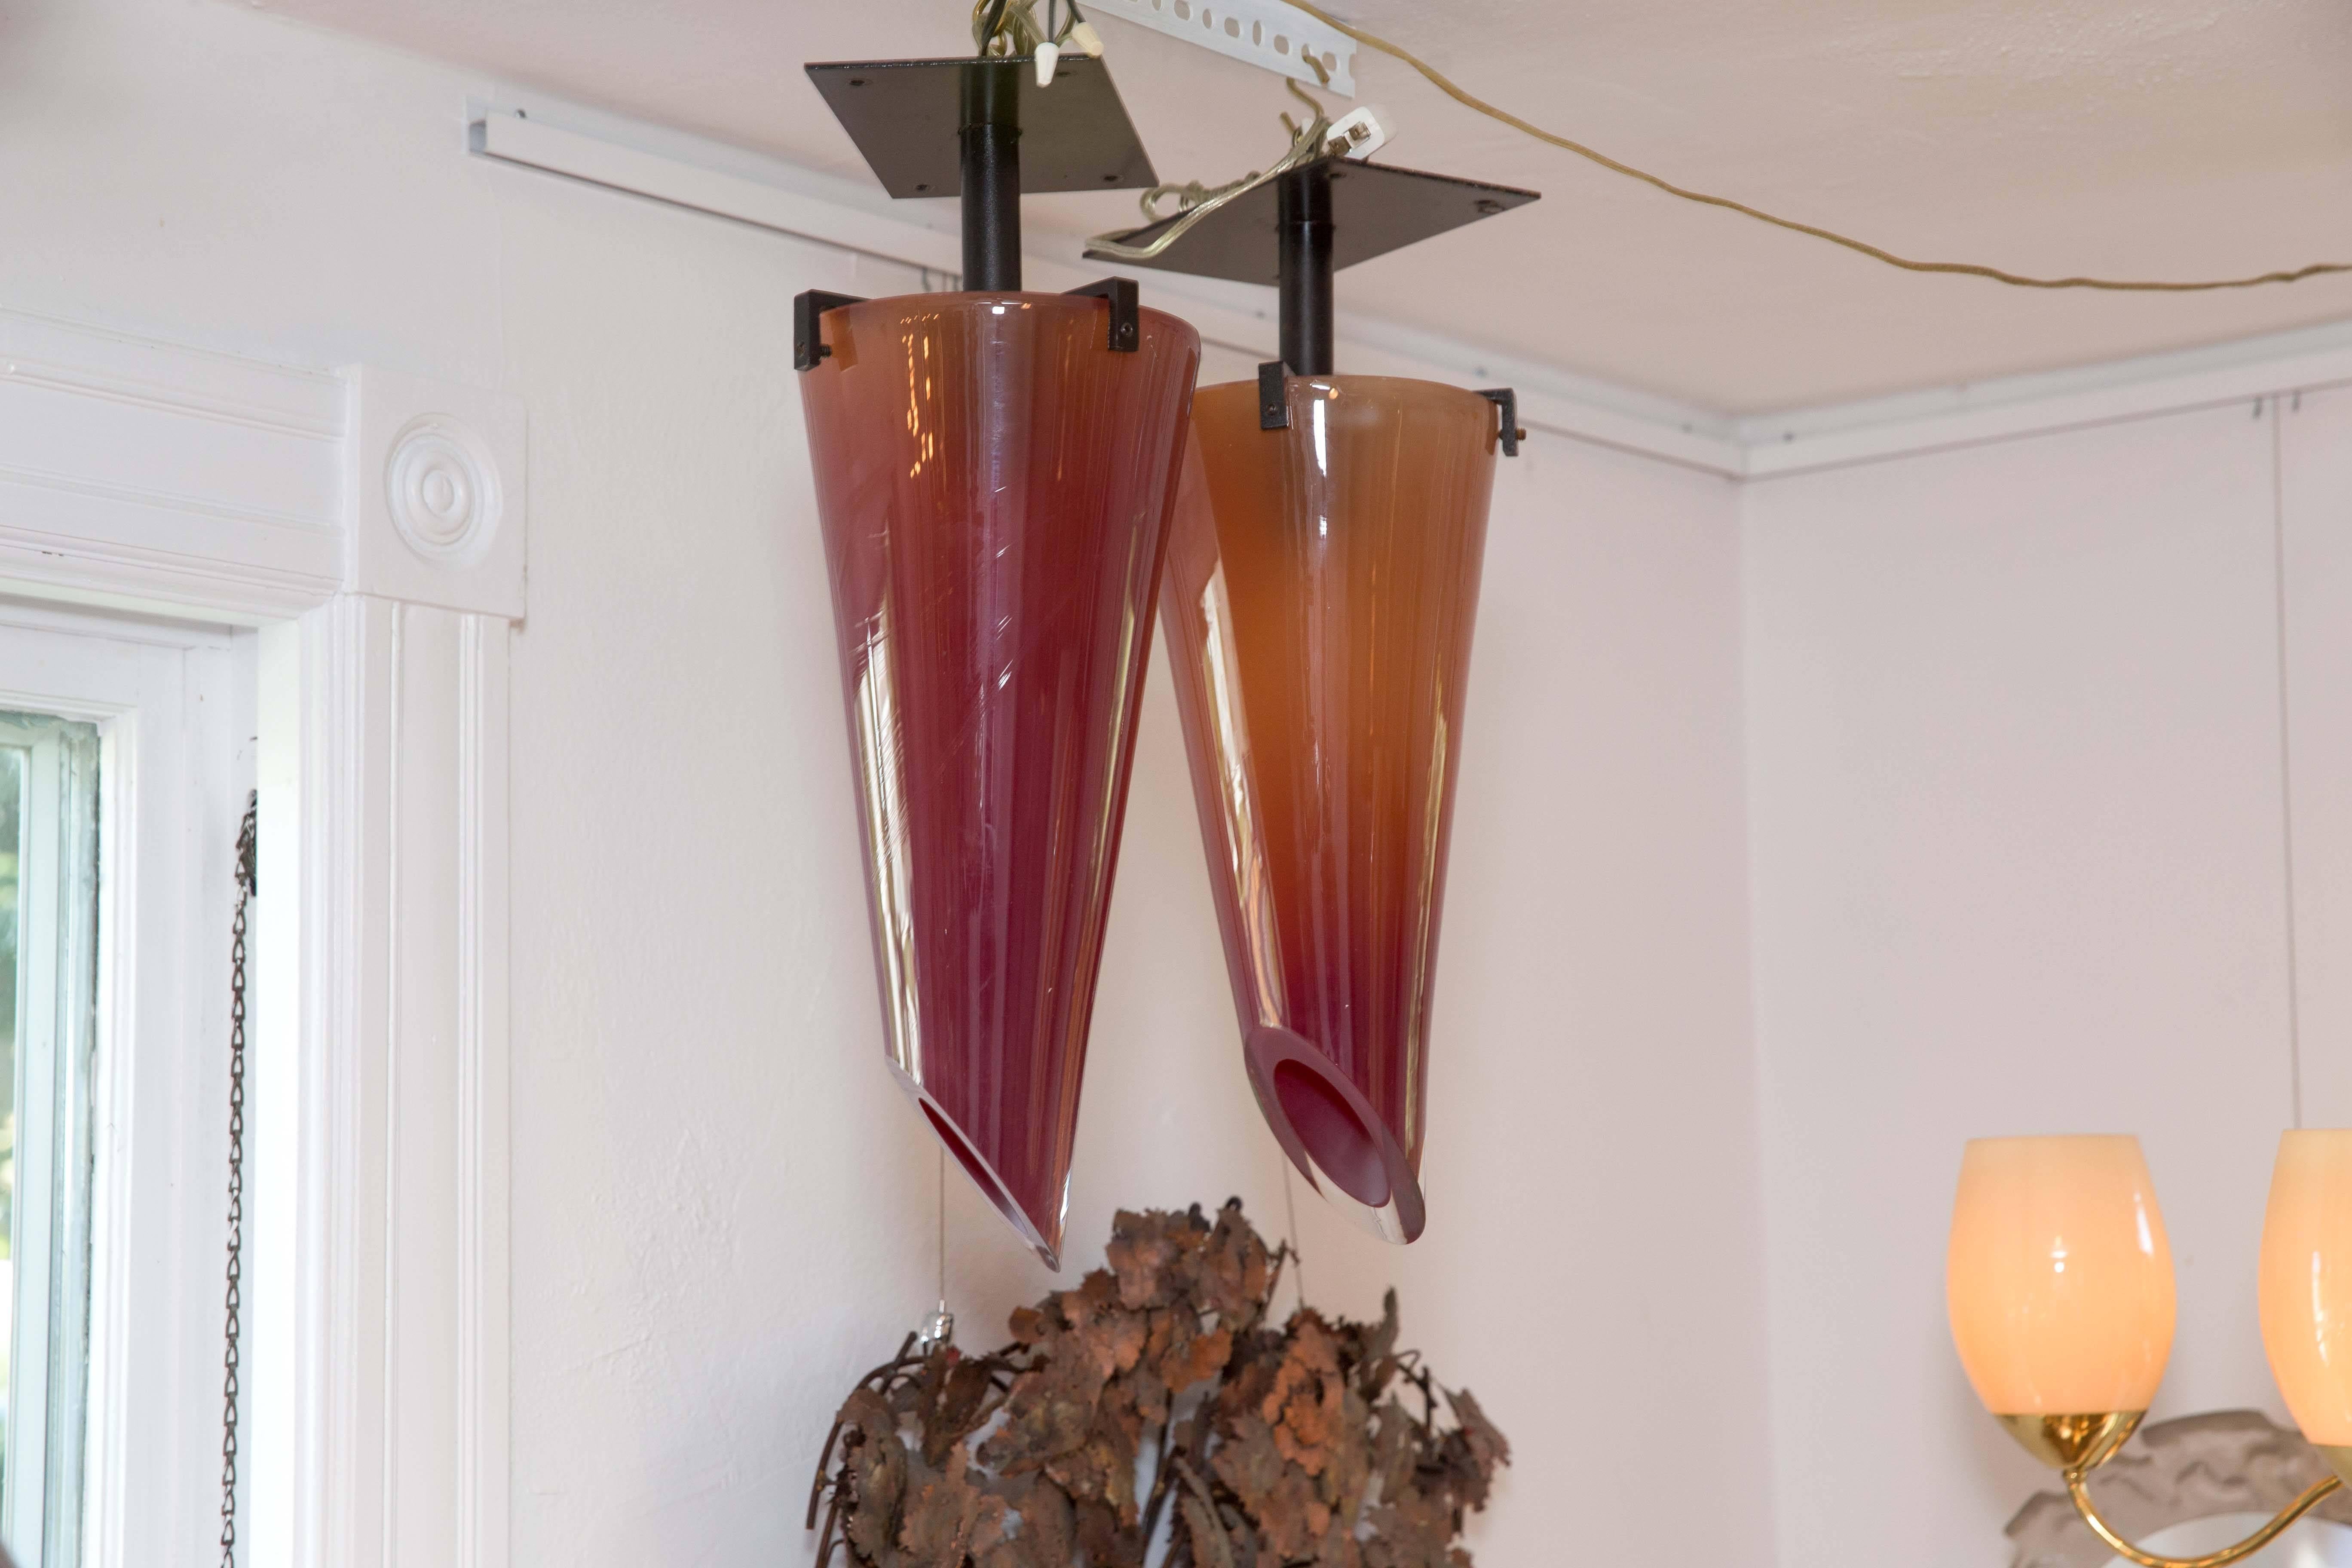 Pair of amber glass and metal chandeliers, by Seguso.